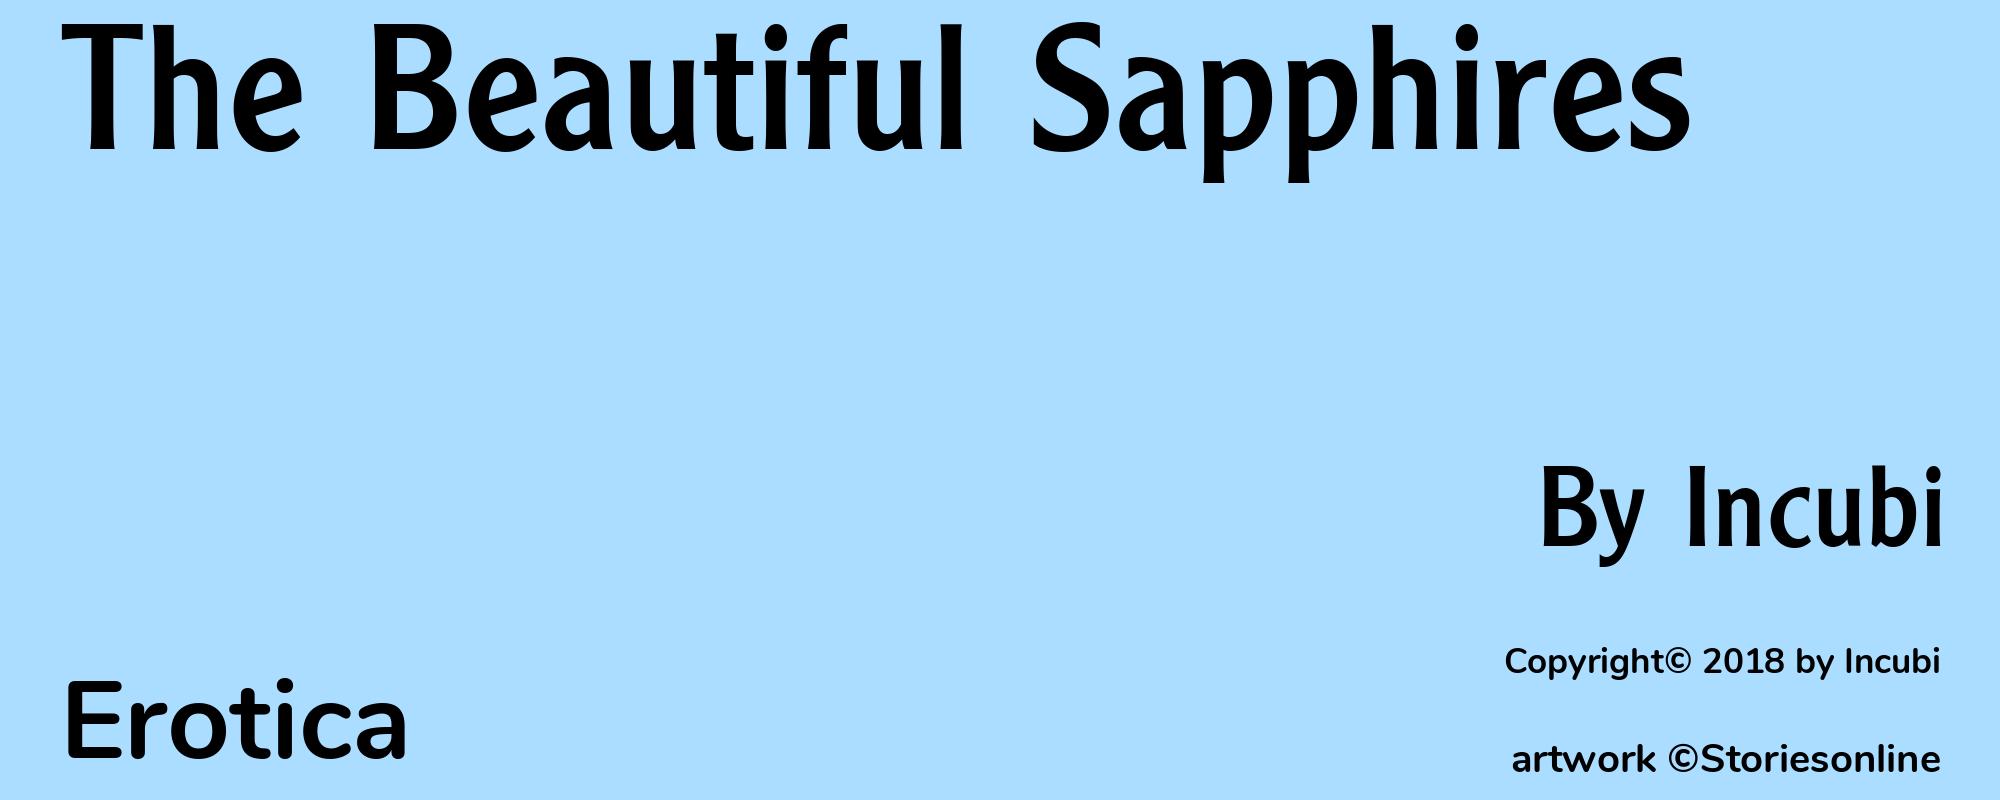 The Beautiful Sapphires - Cover